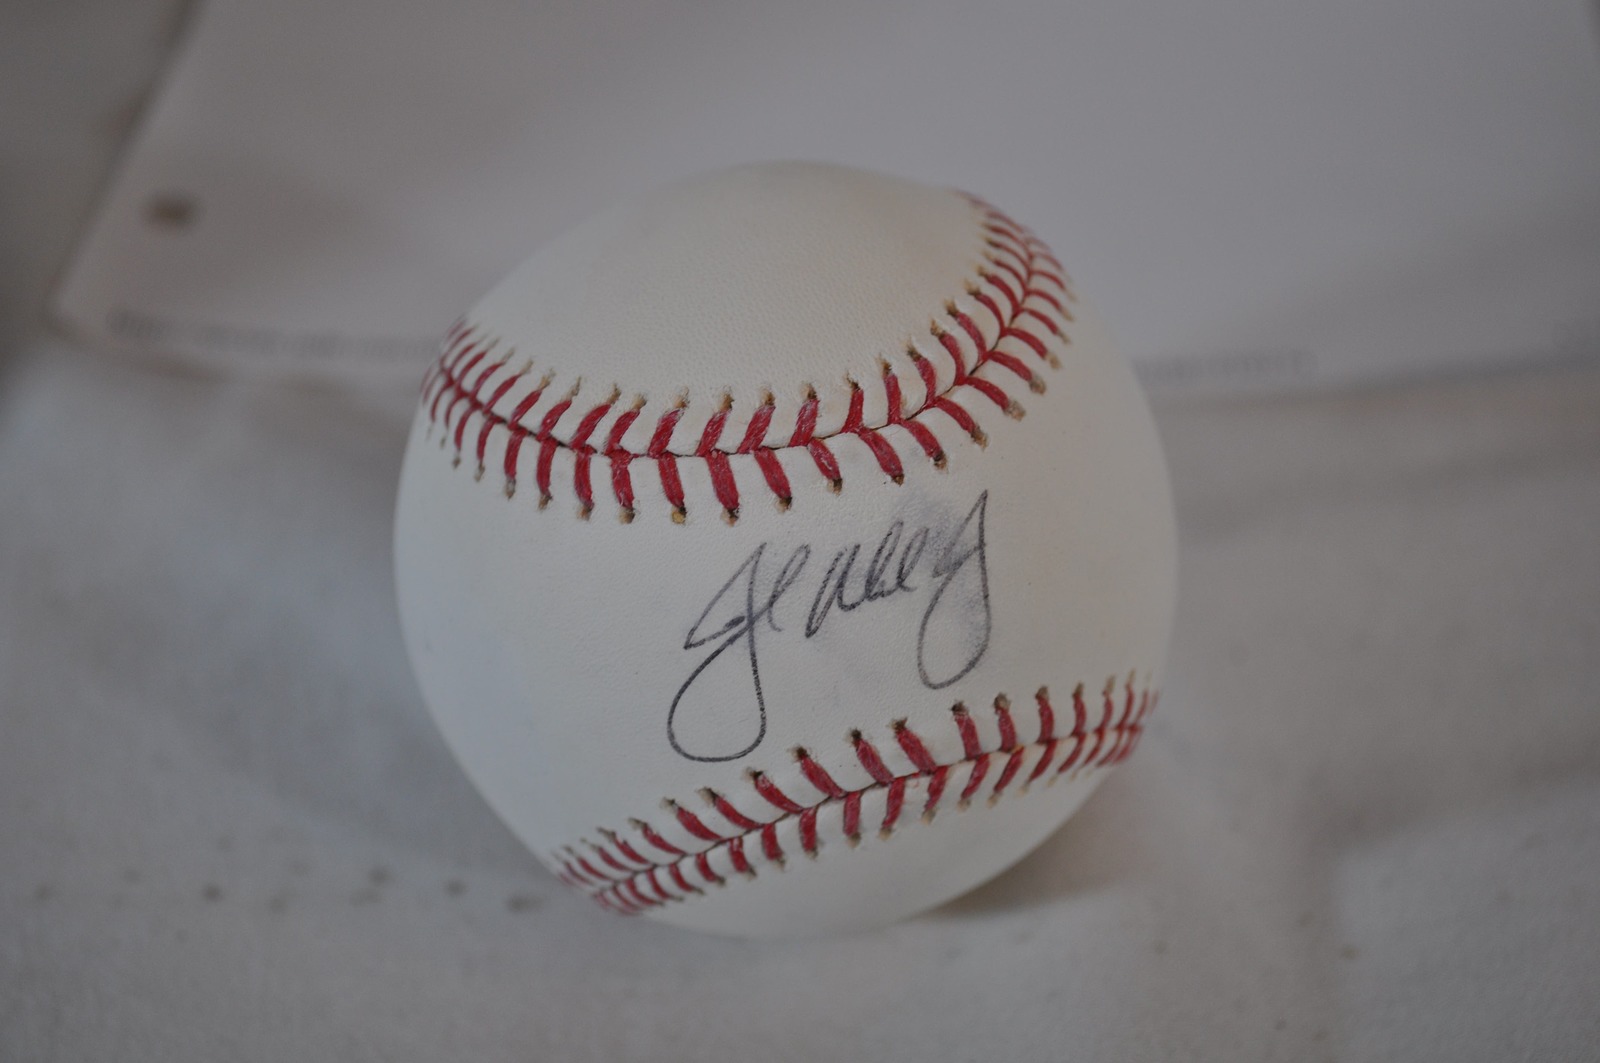 Primary image for John Mayberry Autographed Baseball MLB Authenticated EK210274